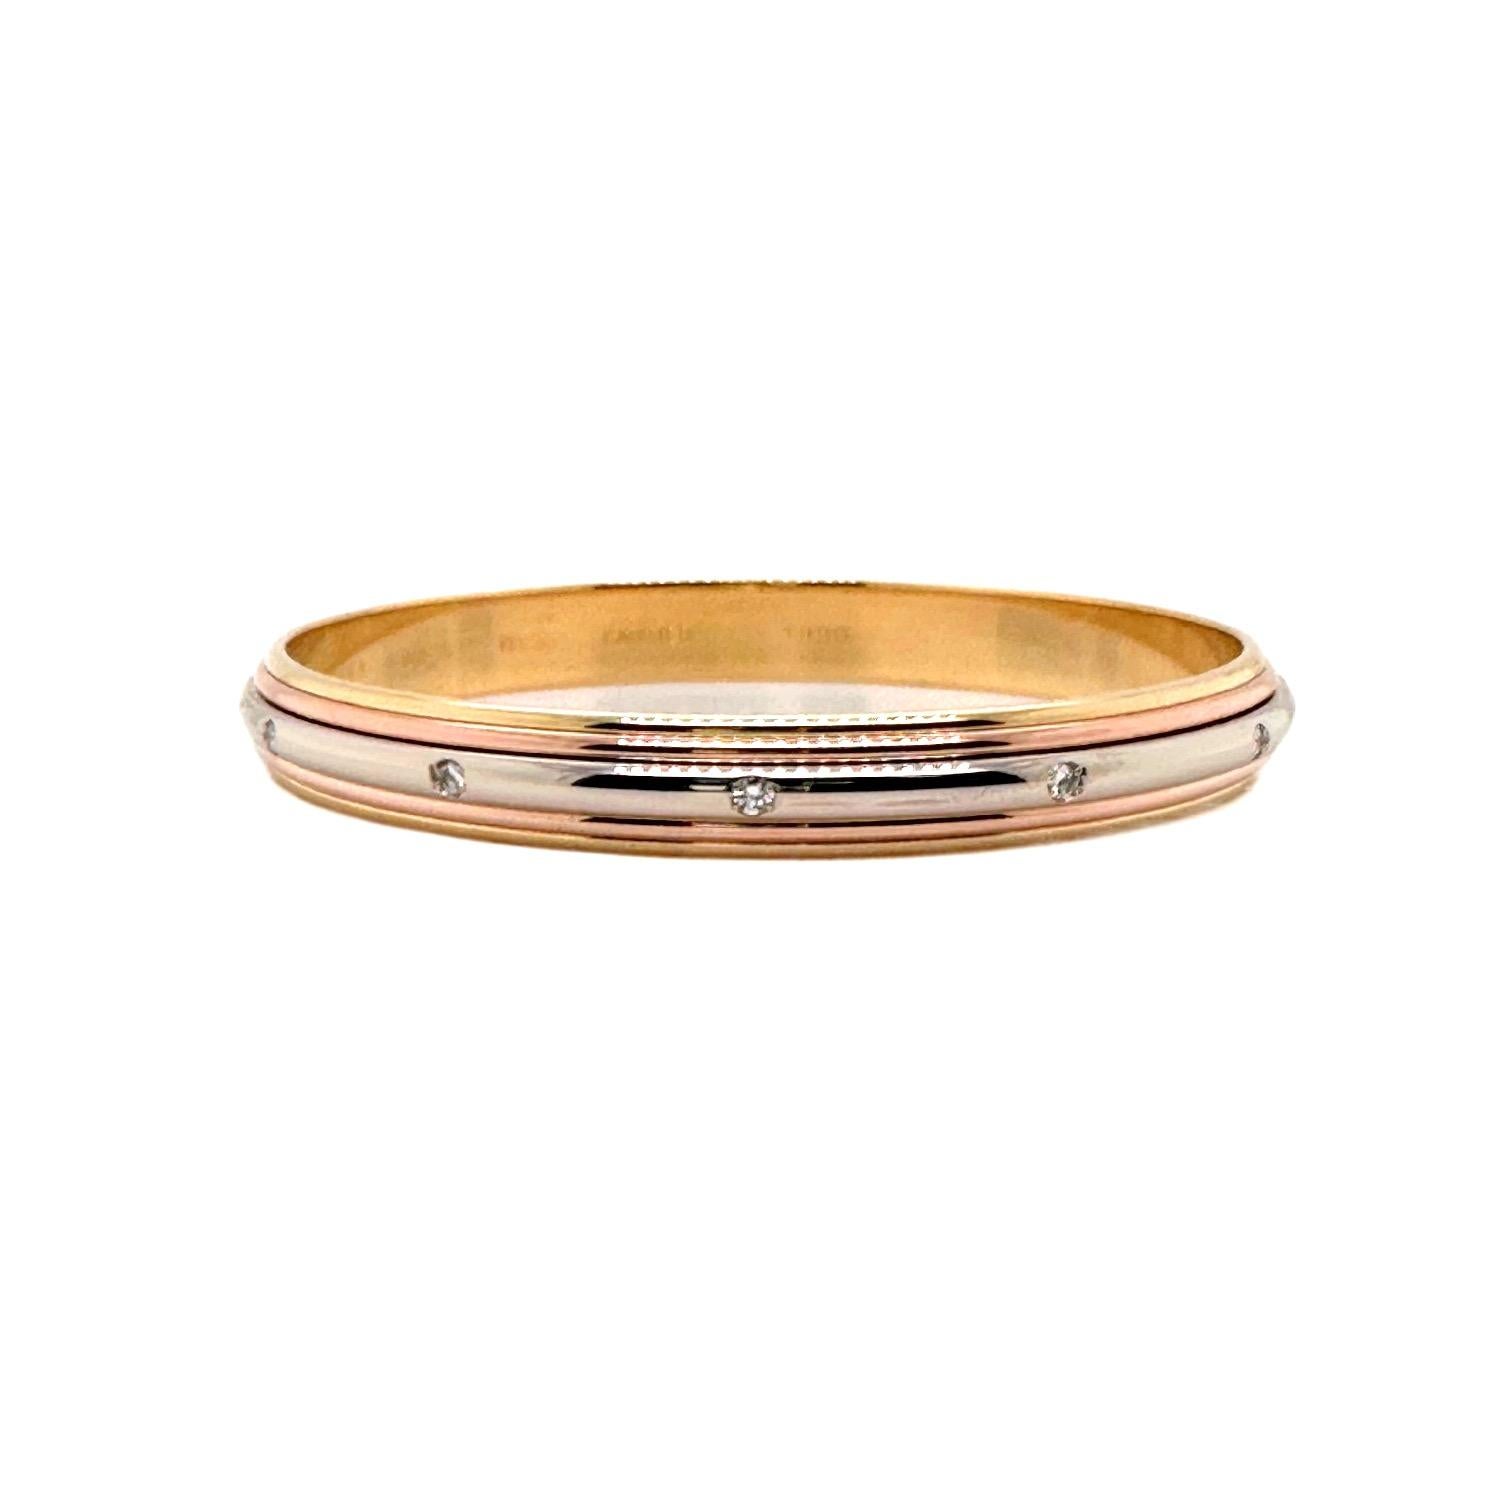 Cartier Saturne Collection Multi-Tone Gold Diamond Bangle Bracelet
Style:  Bangle
Ref. number:   B46468
Metal:   Multi-Toned 18kt White Yellow Rose Gold 52.2 grams
Size:  7.5' inside measurement,  2.5' Inches Length, 8.5 mm Width
Diamonds:  12 Round